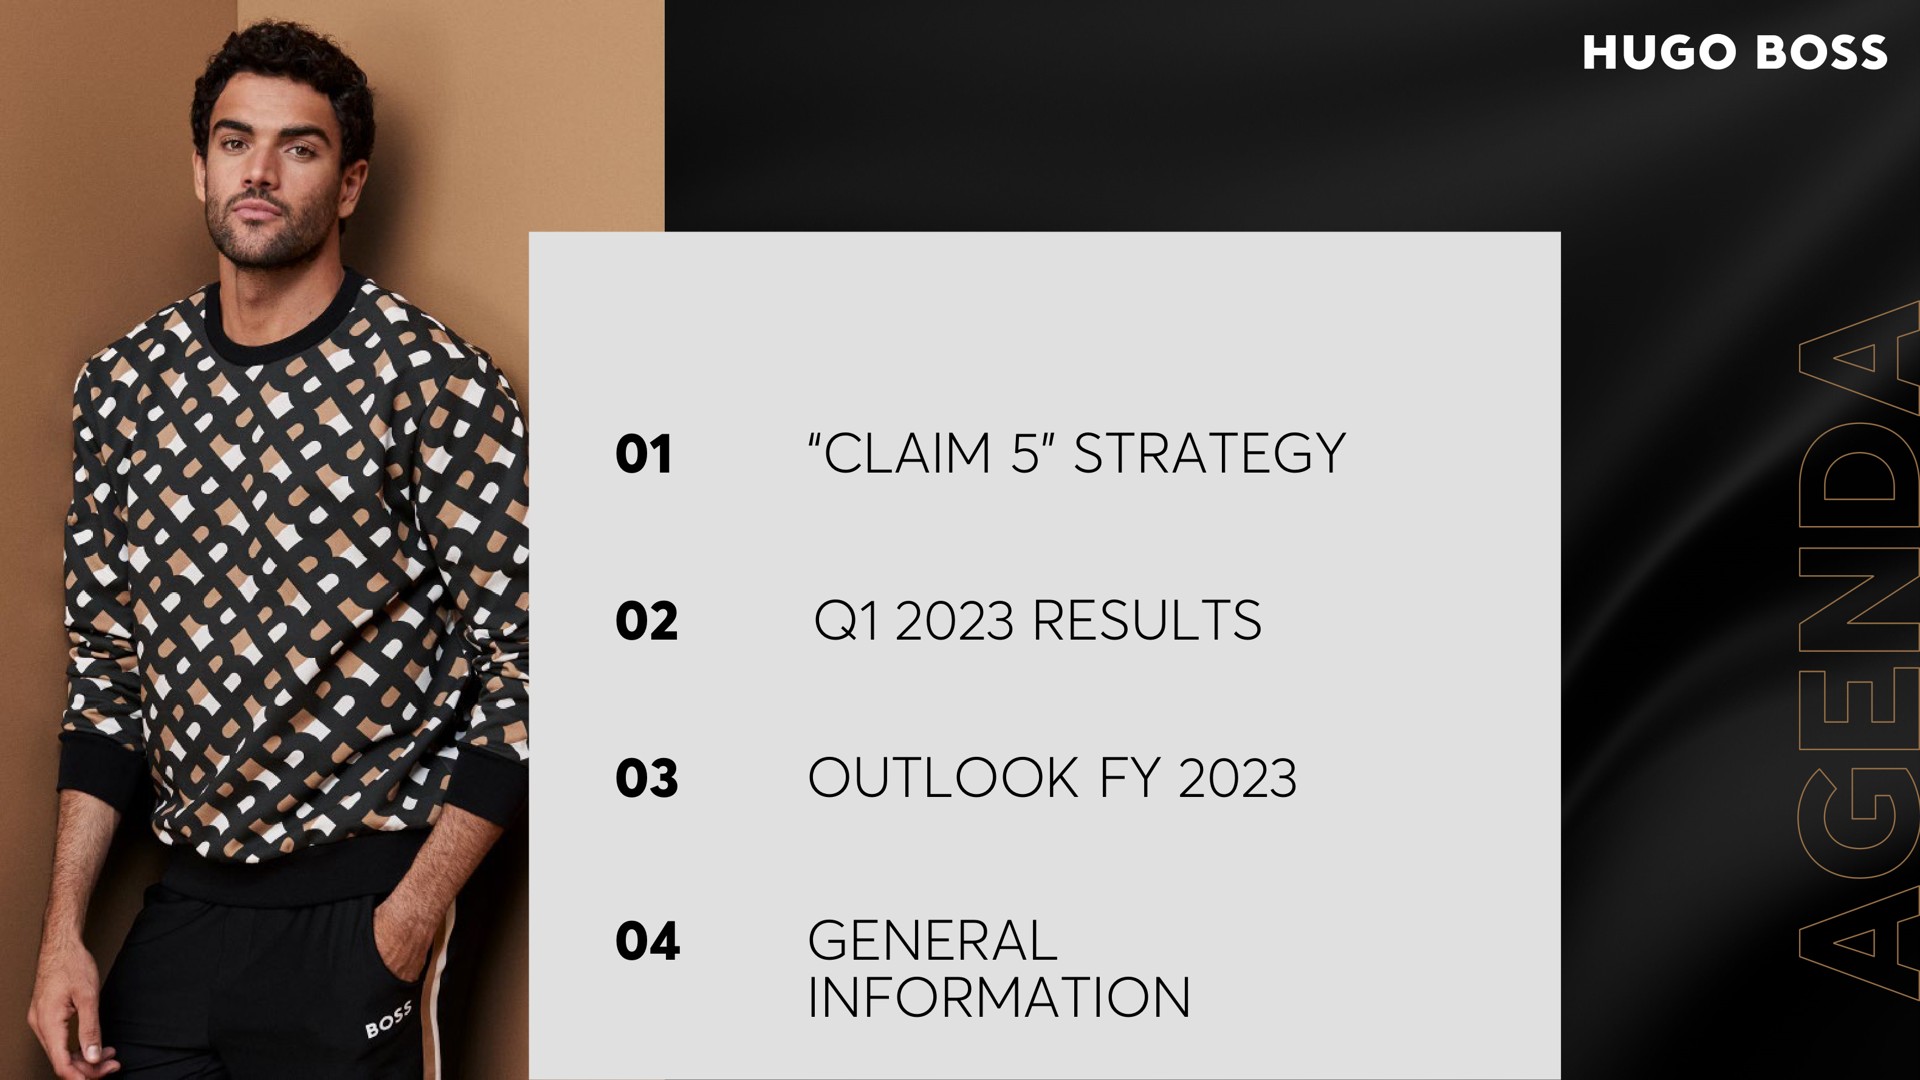 claim strategy results outlook general information boss | Hugo Boss